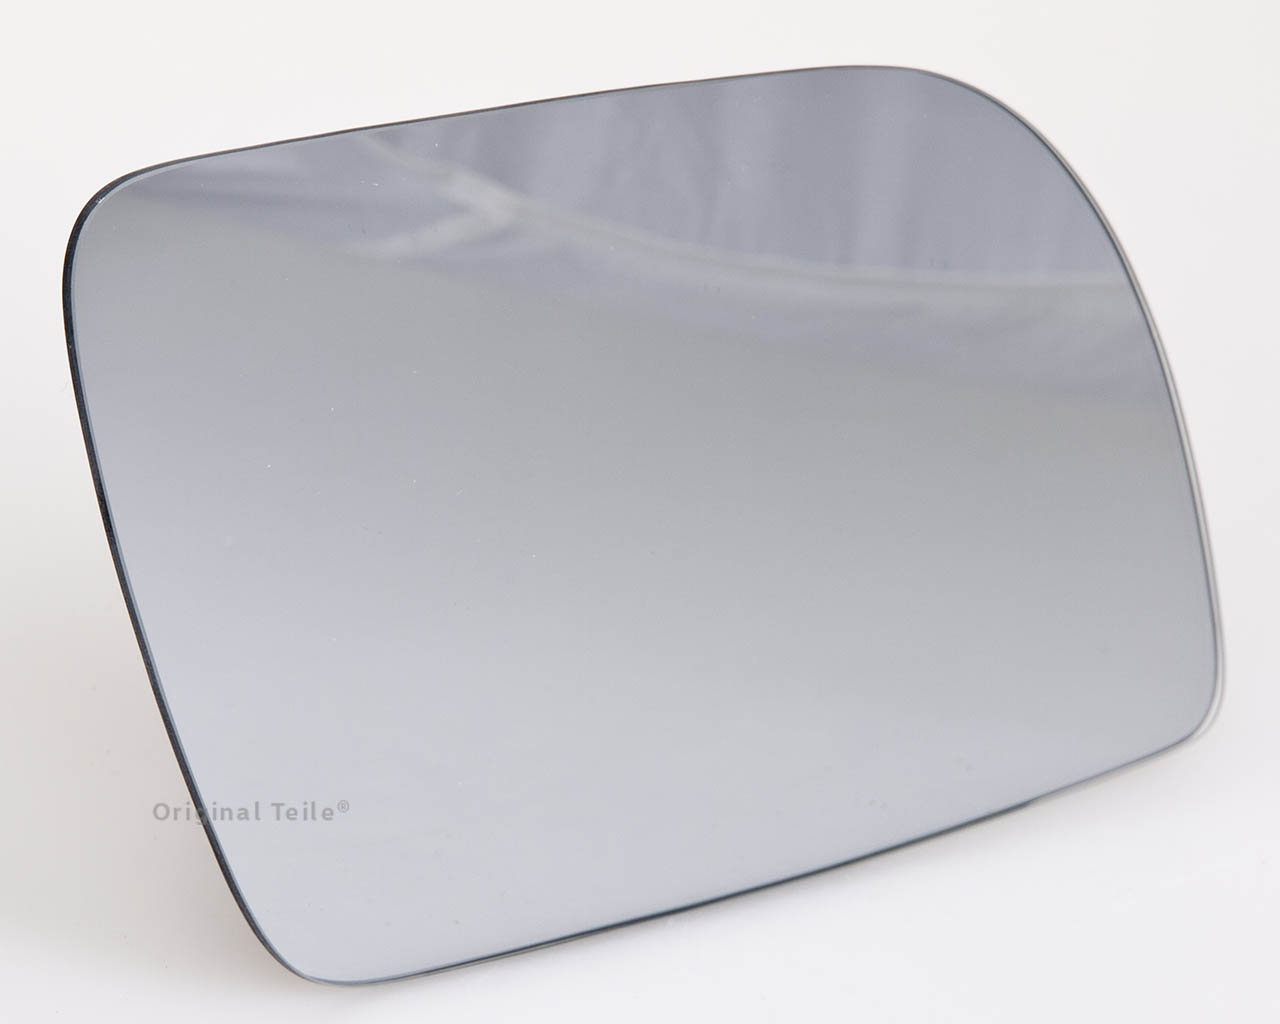 Mirror glass for VW Polo 9N